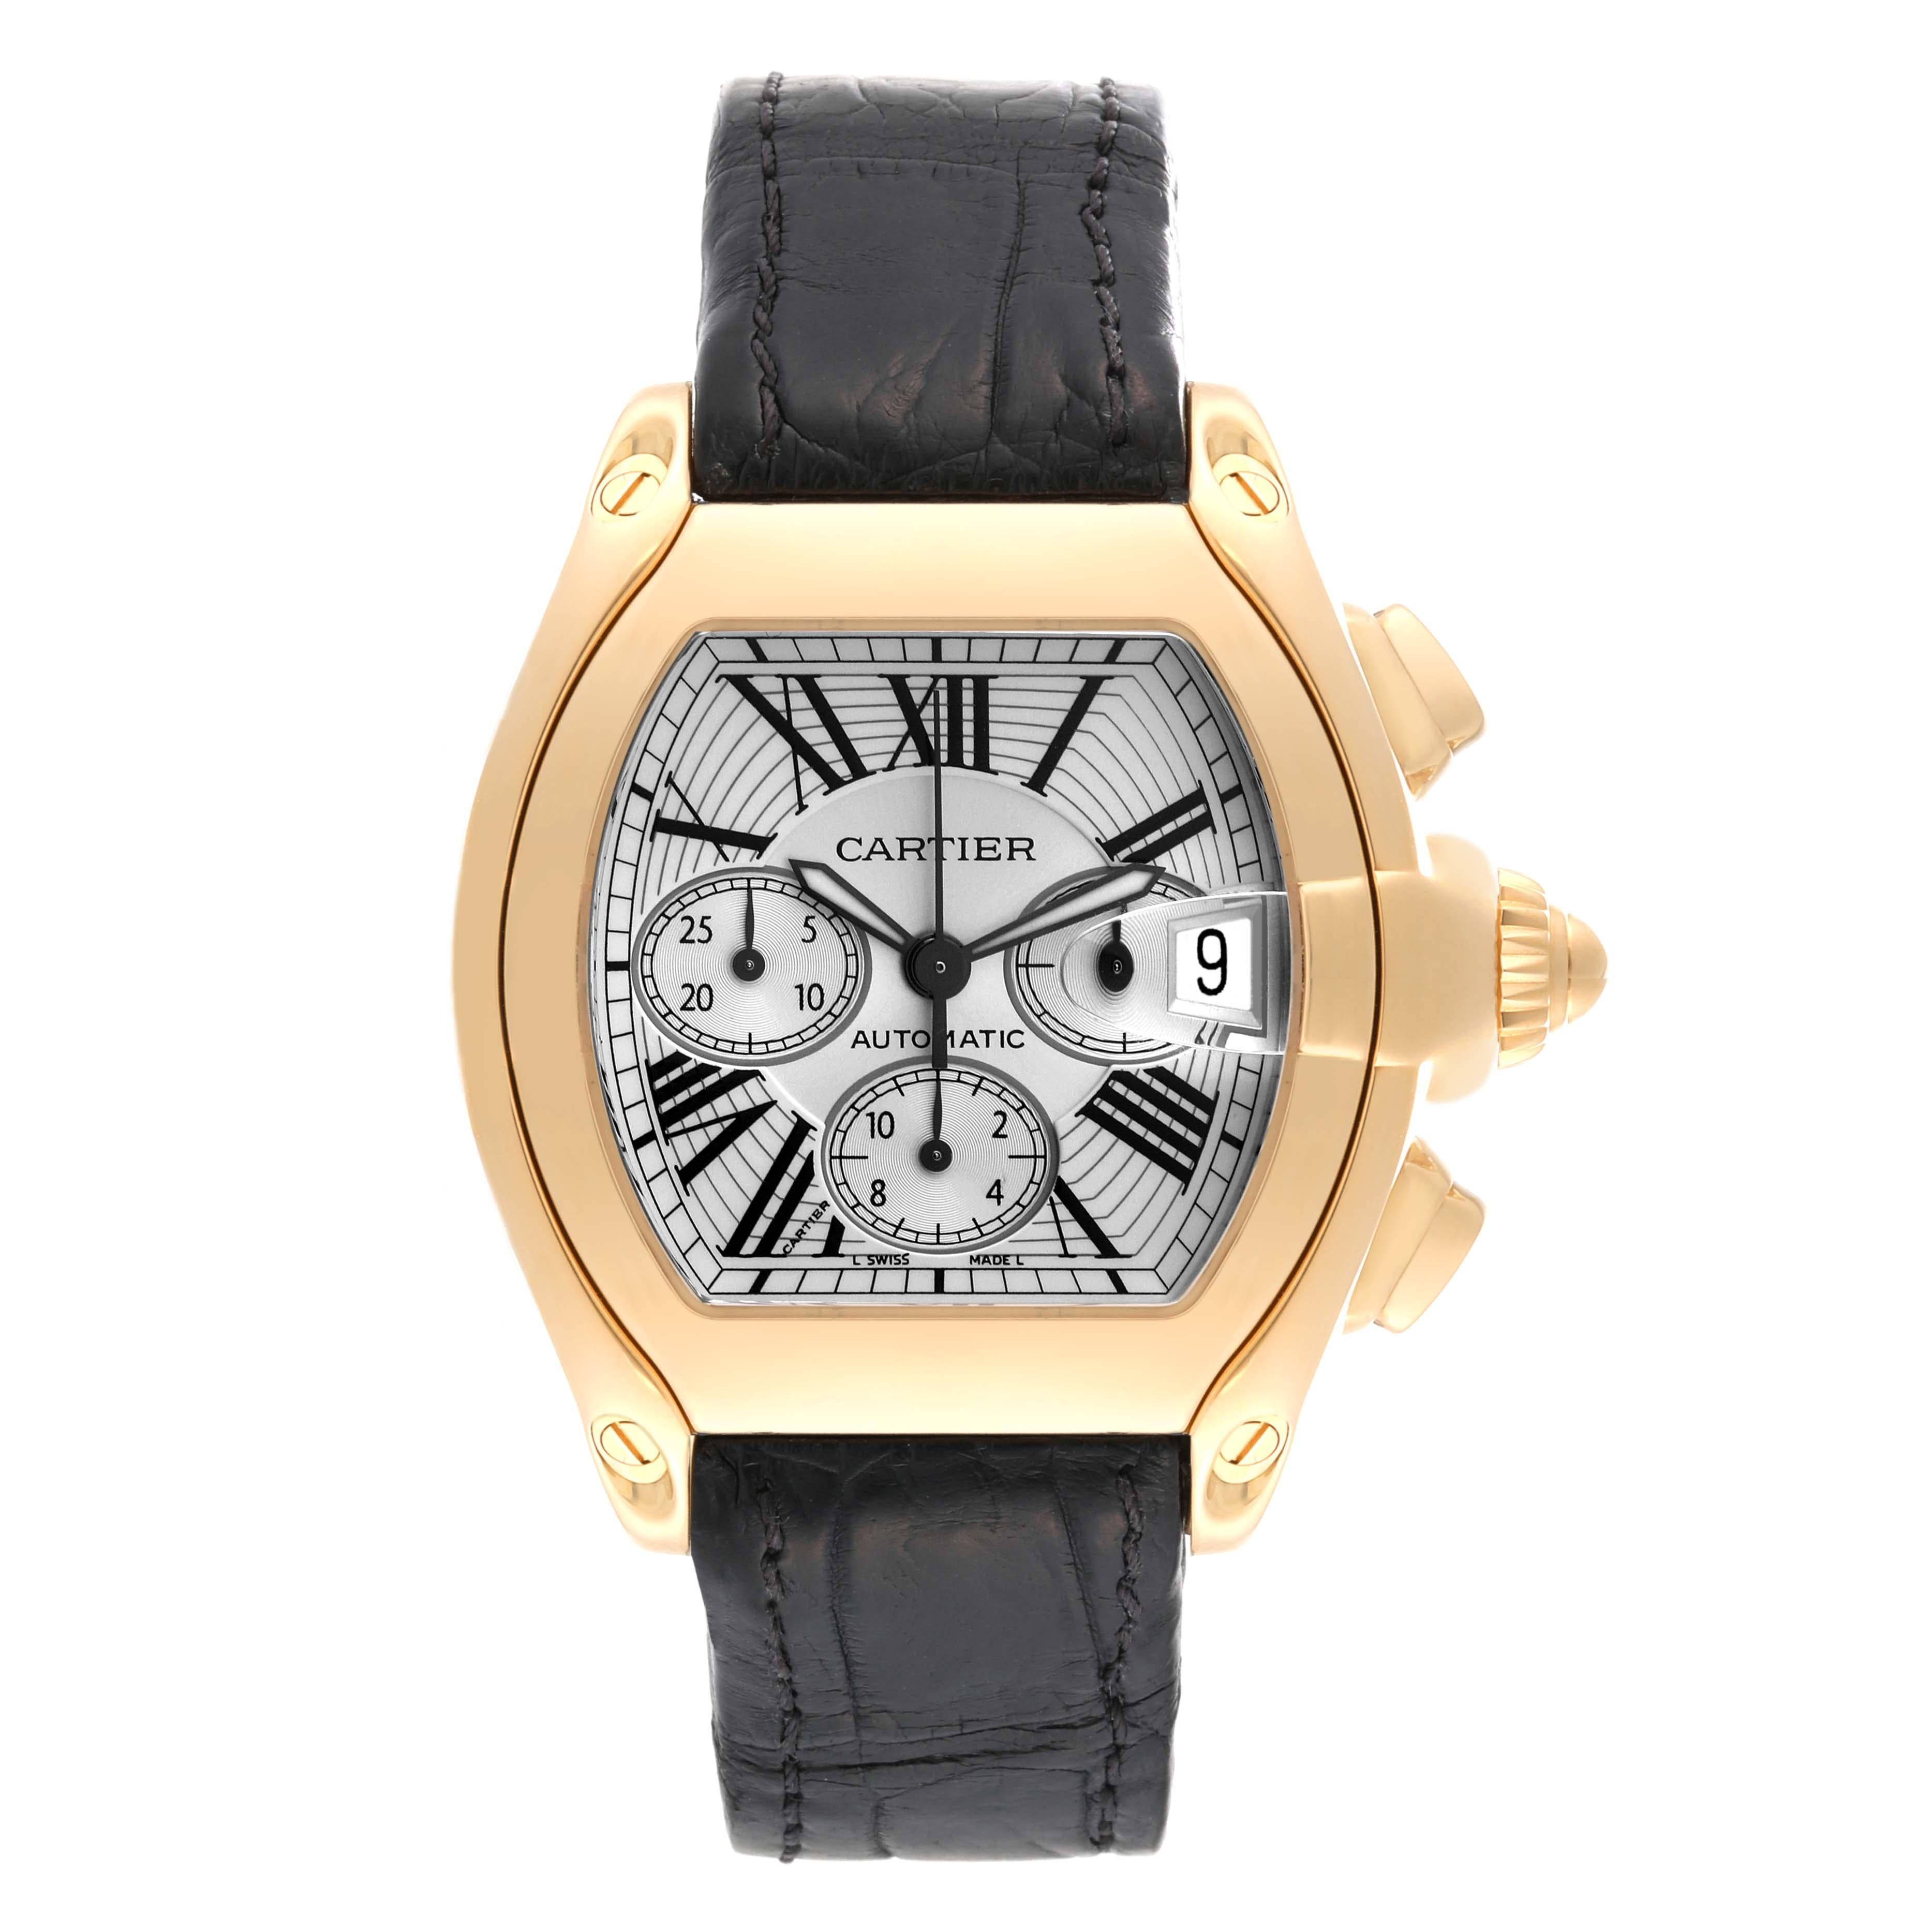 Cartier Roadster Chronograph Yellow Gold Black Strap Mens Watch W62021Y3 In Excellent Condition For Sale In Atlanta, GA